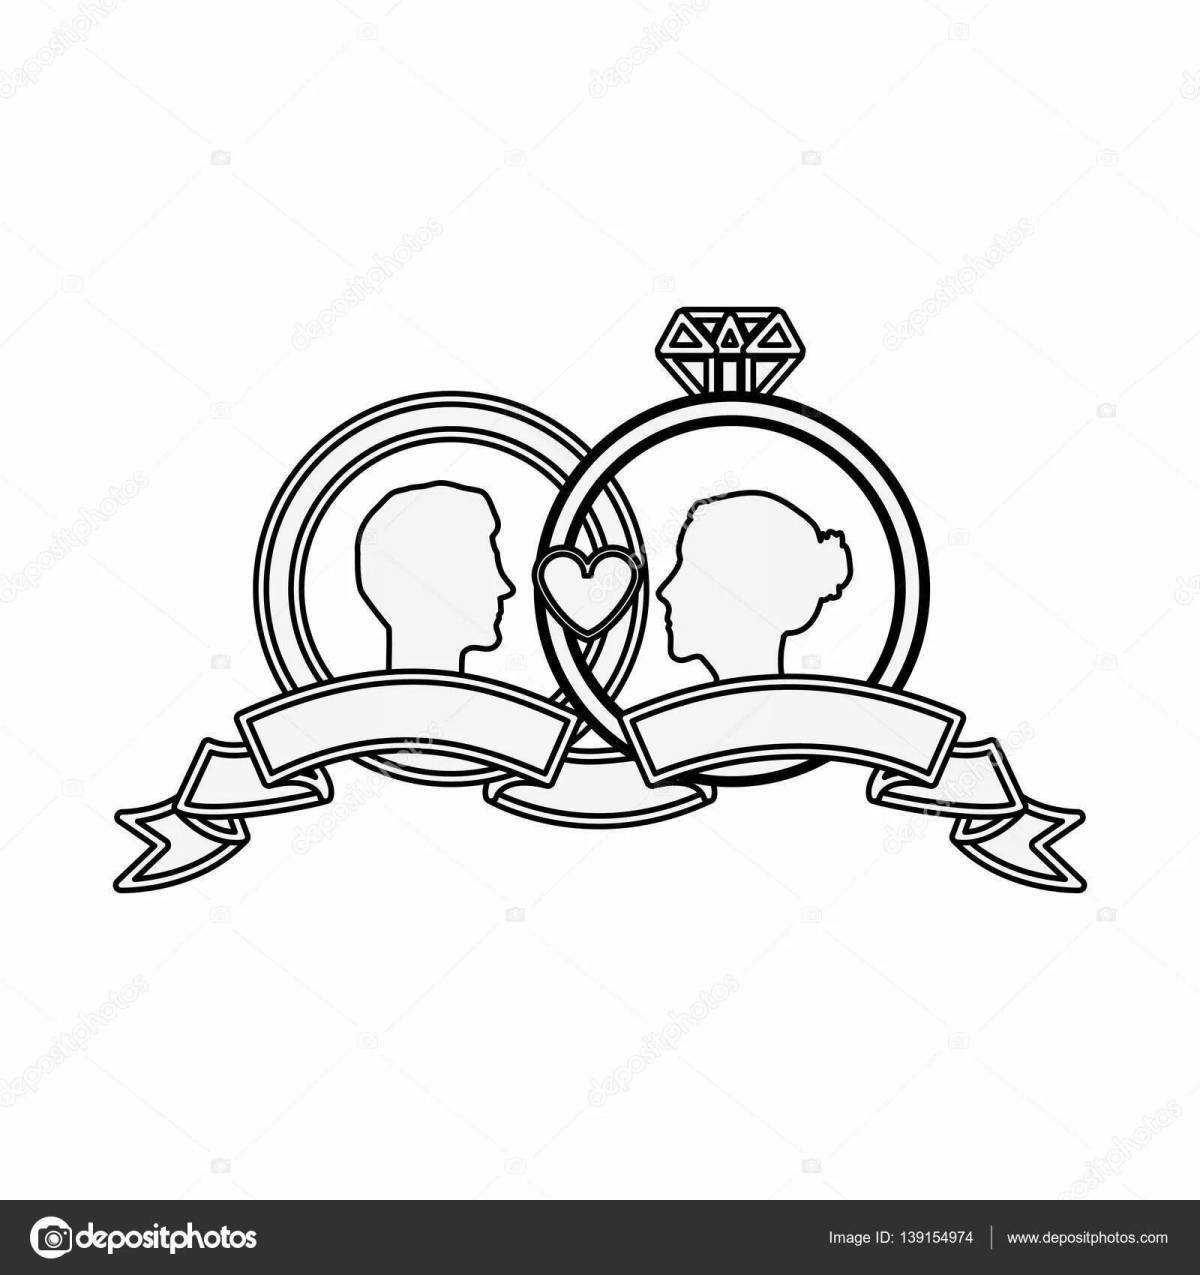 Intricate wedding ring coloring pages